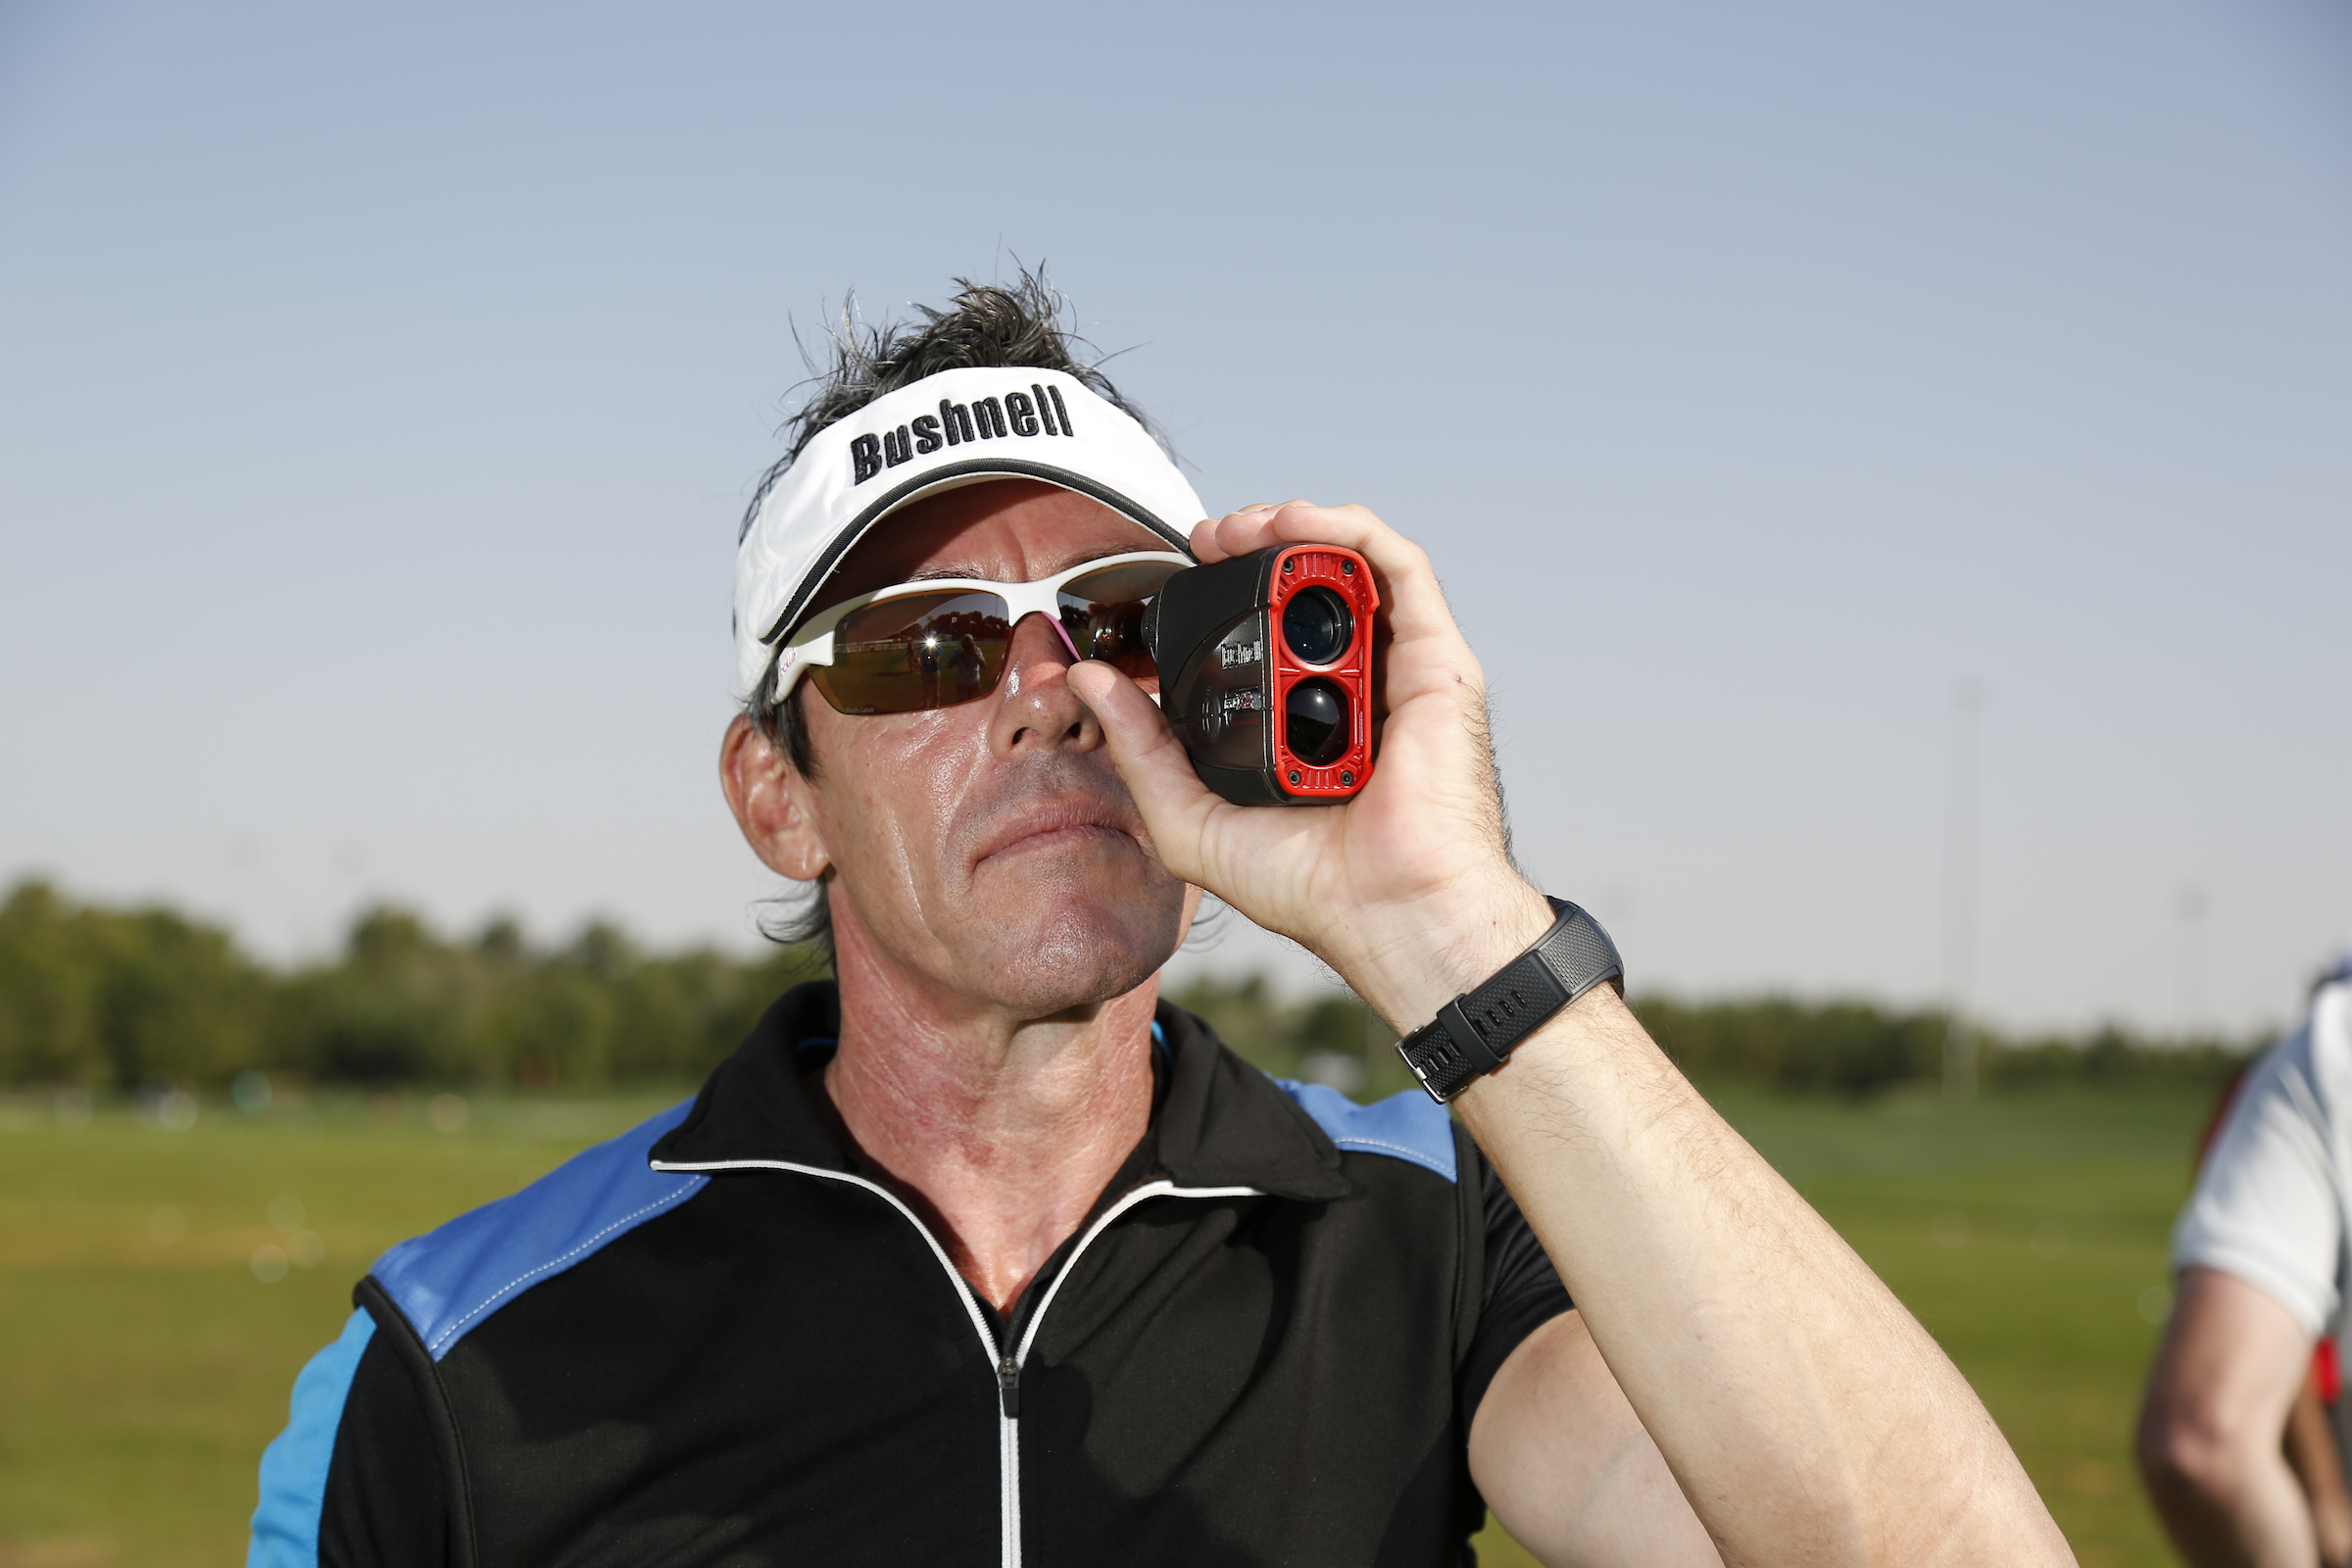 Bushnell partners with five European Tour caddie ambassadors for 2018